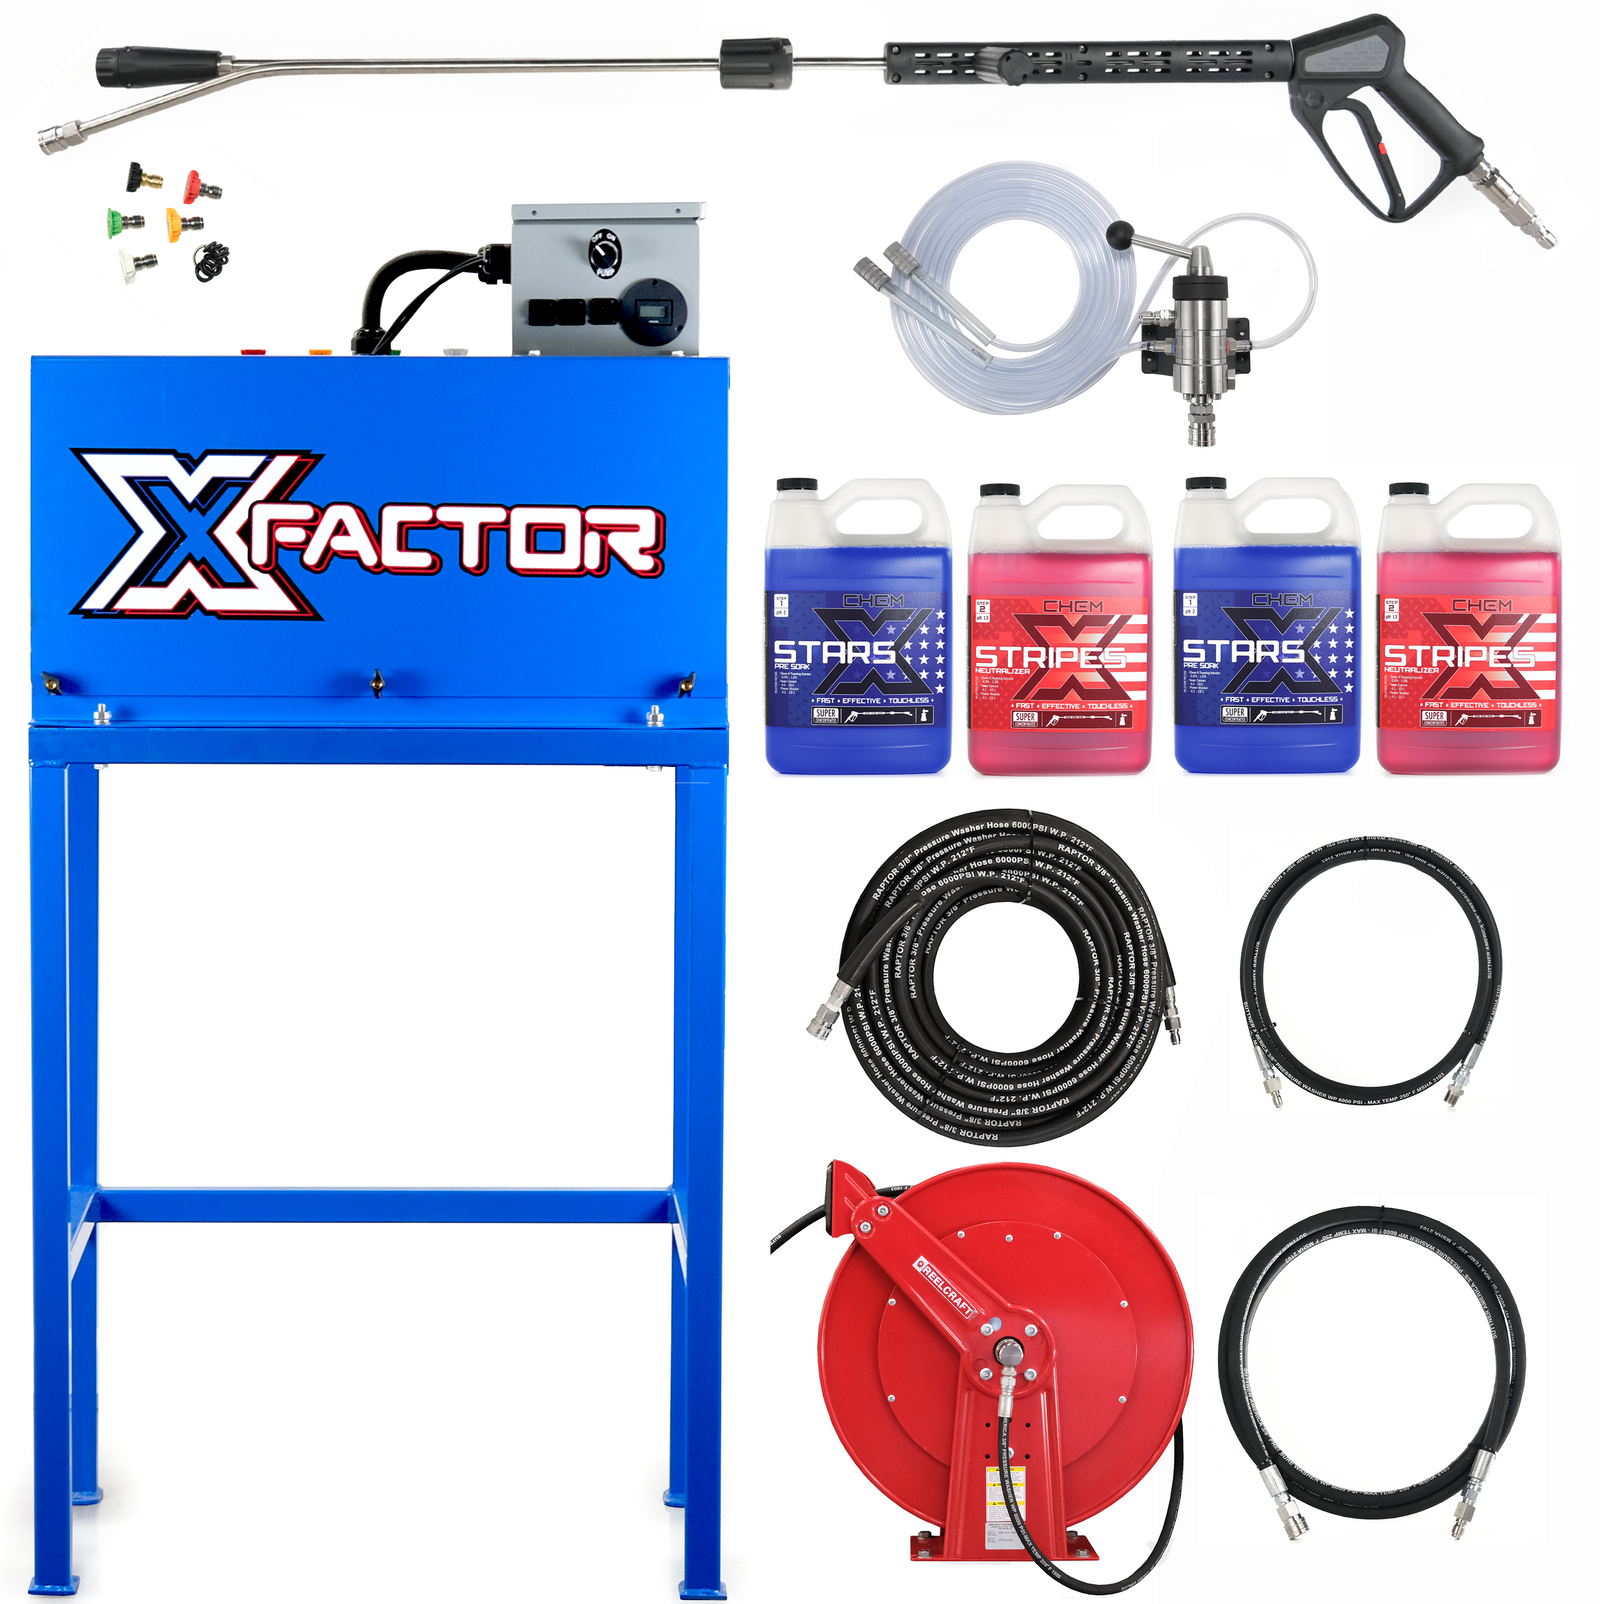 X Factor Complete Wash Bay System: Stationary 220v Electric - REAL DEAL TOUCHLESS FOAMING KIT - Chem-X